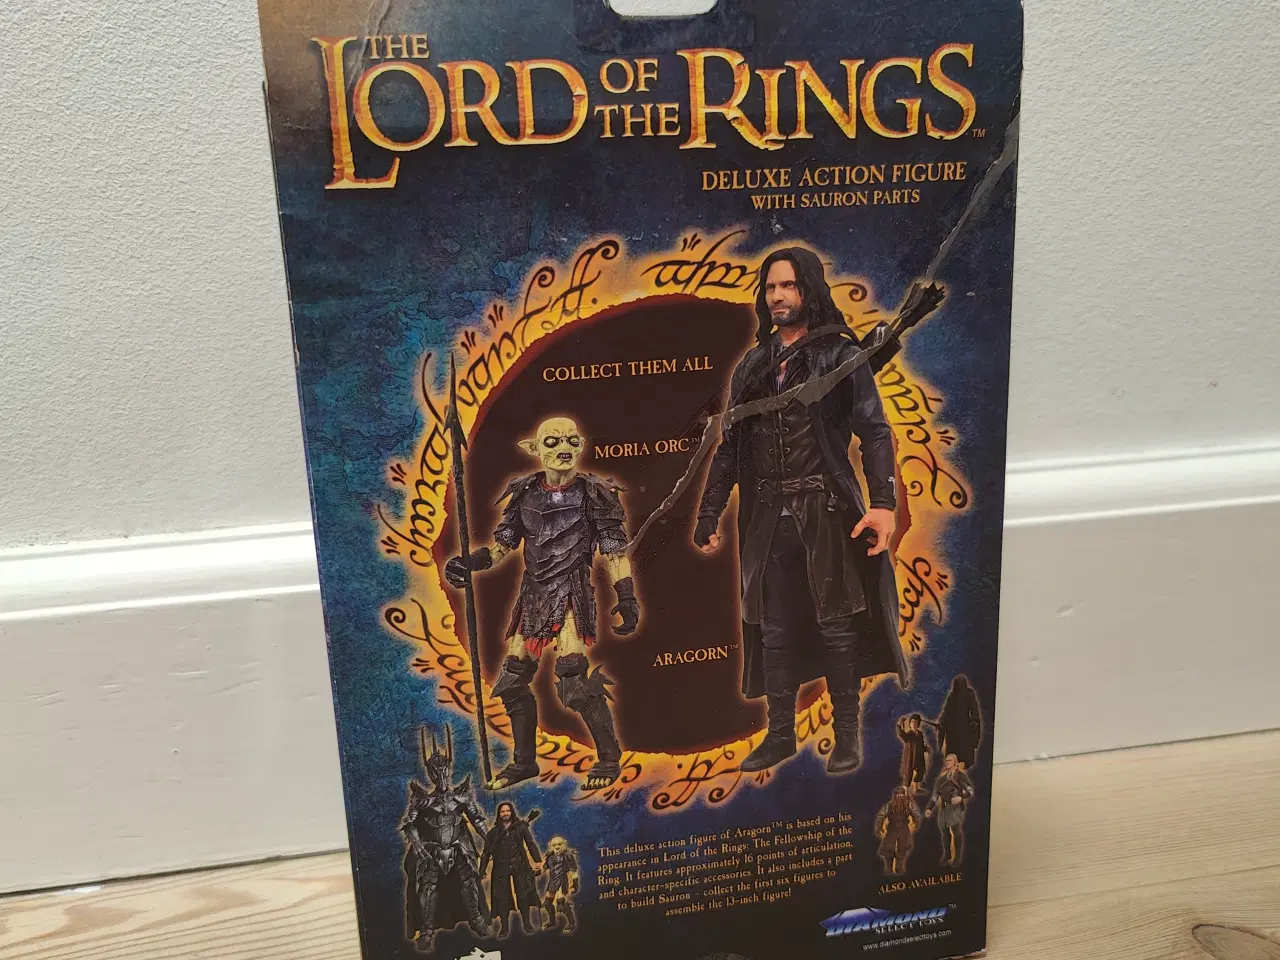 Billede 3 - The Lord of the Rings Aragorn figur